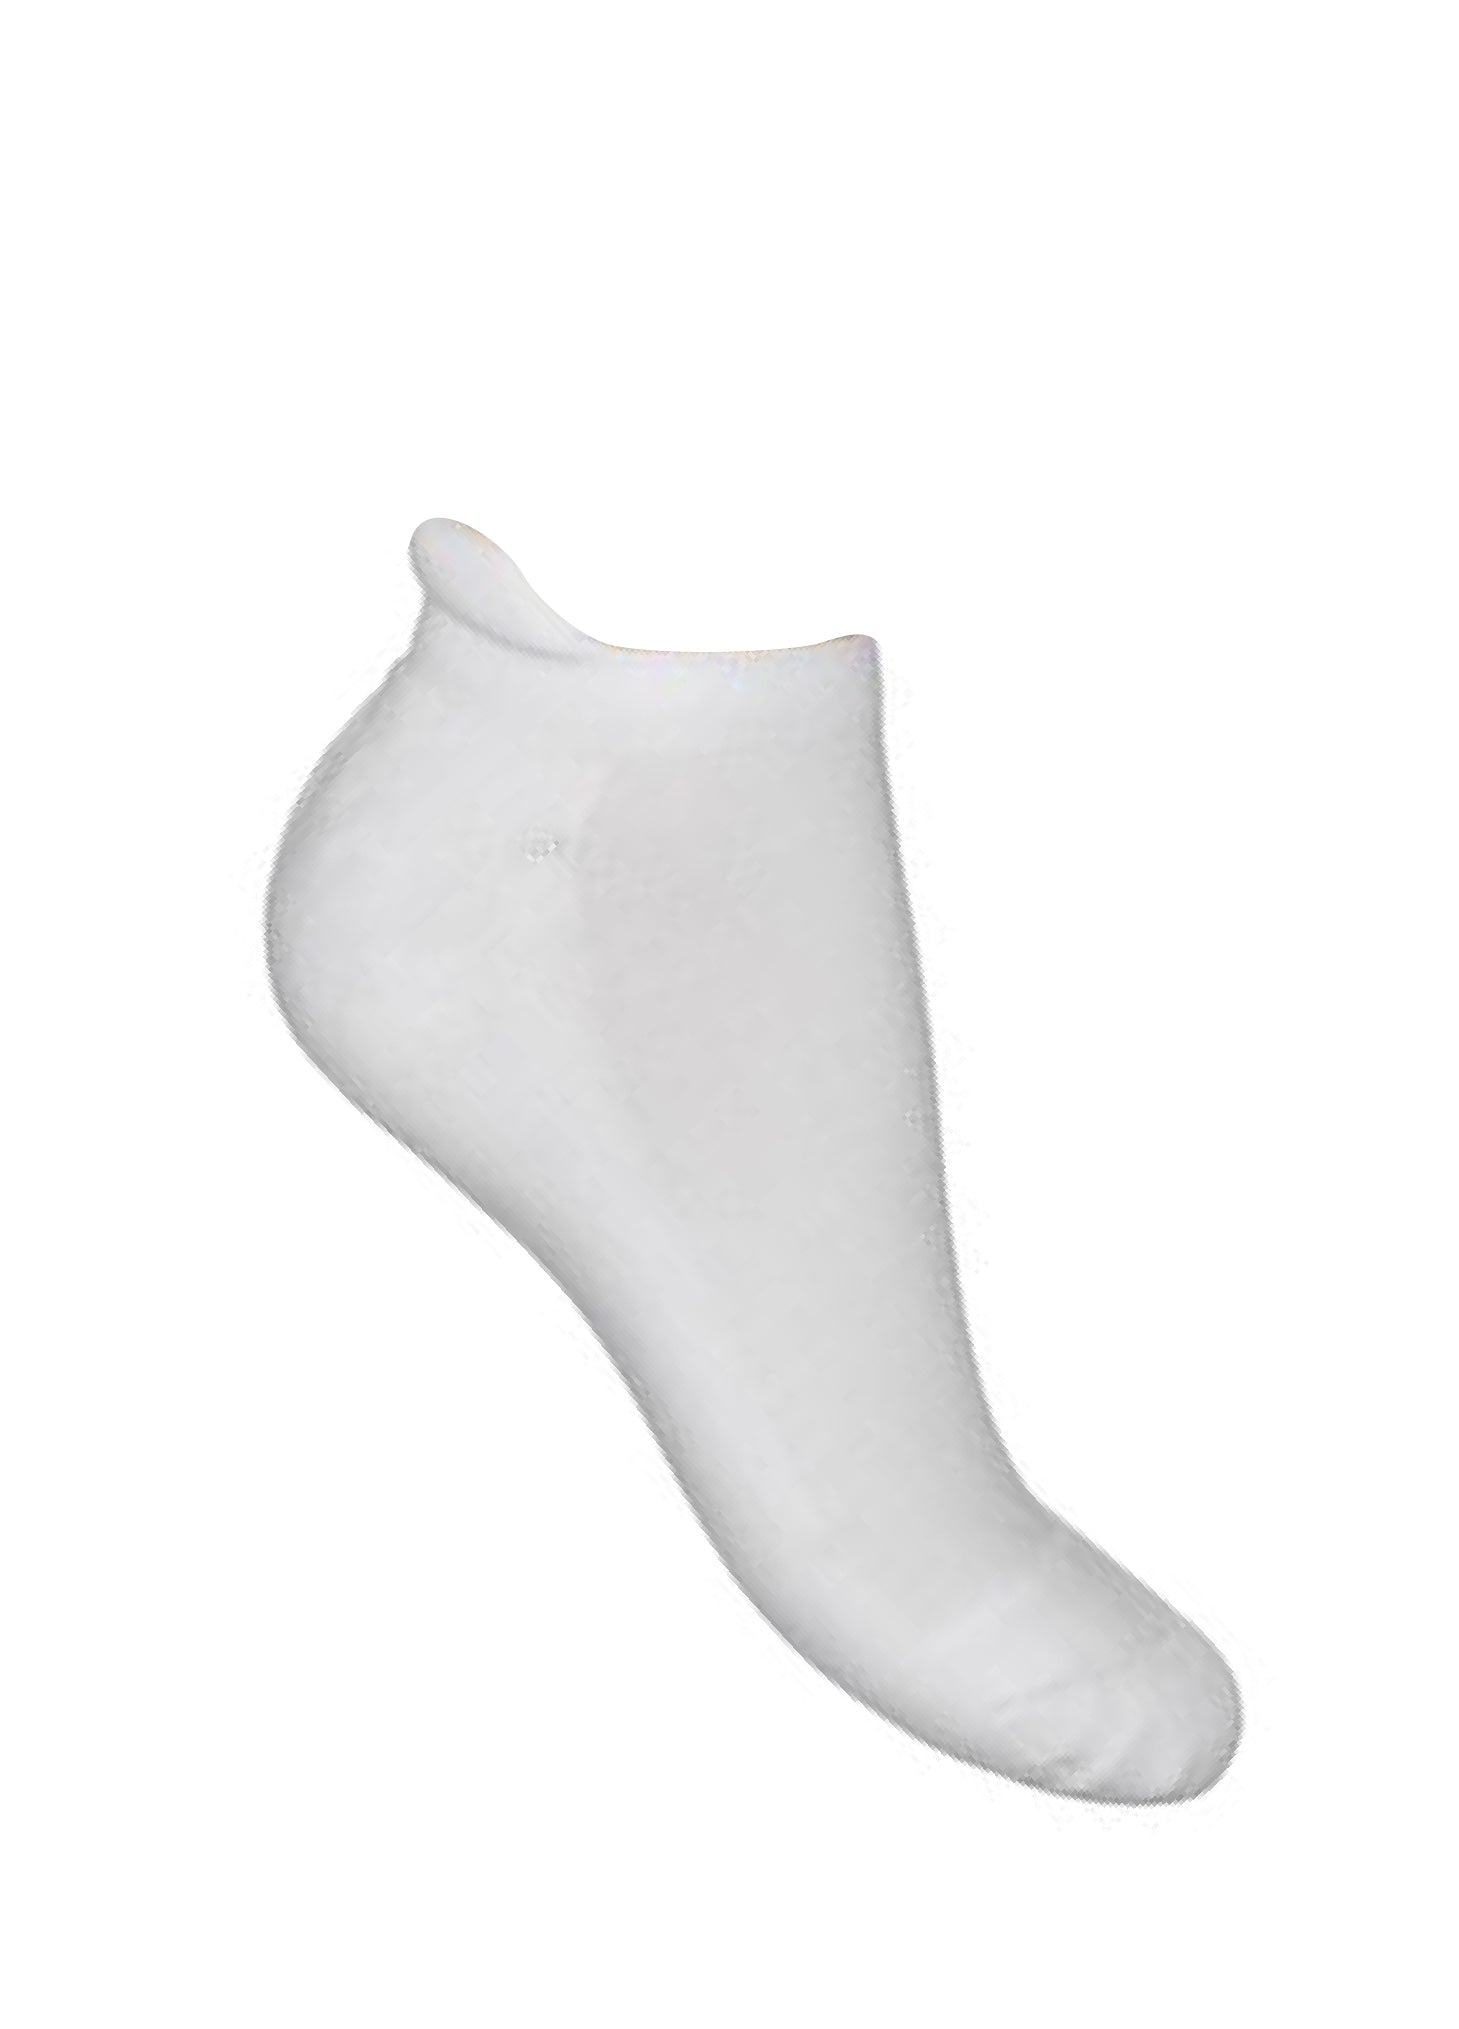 Bonnie Doon - BE631050 Cushion Short Sock - white low ankle cotton sports sock